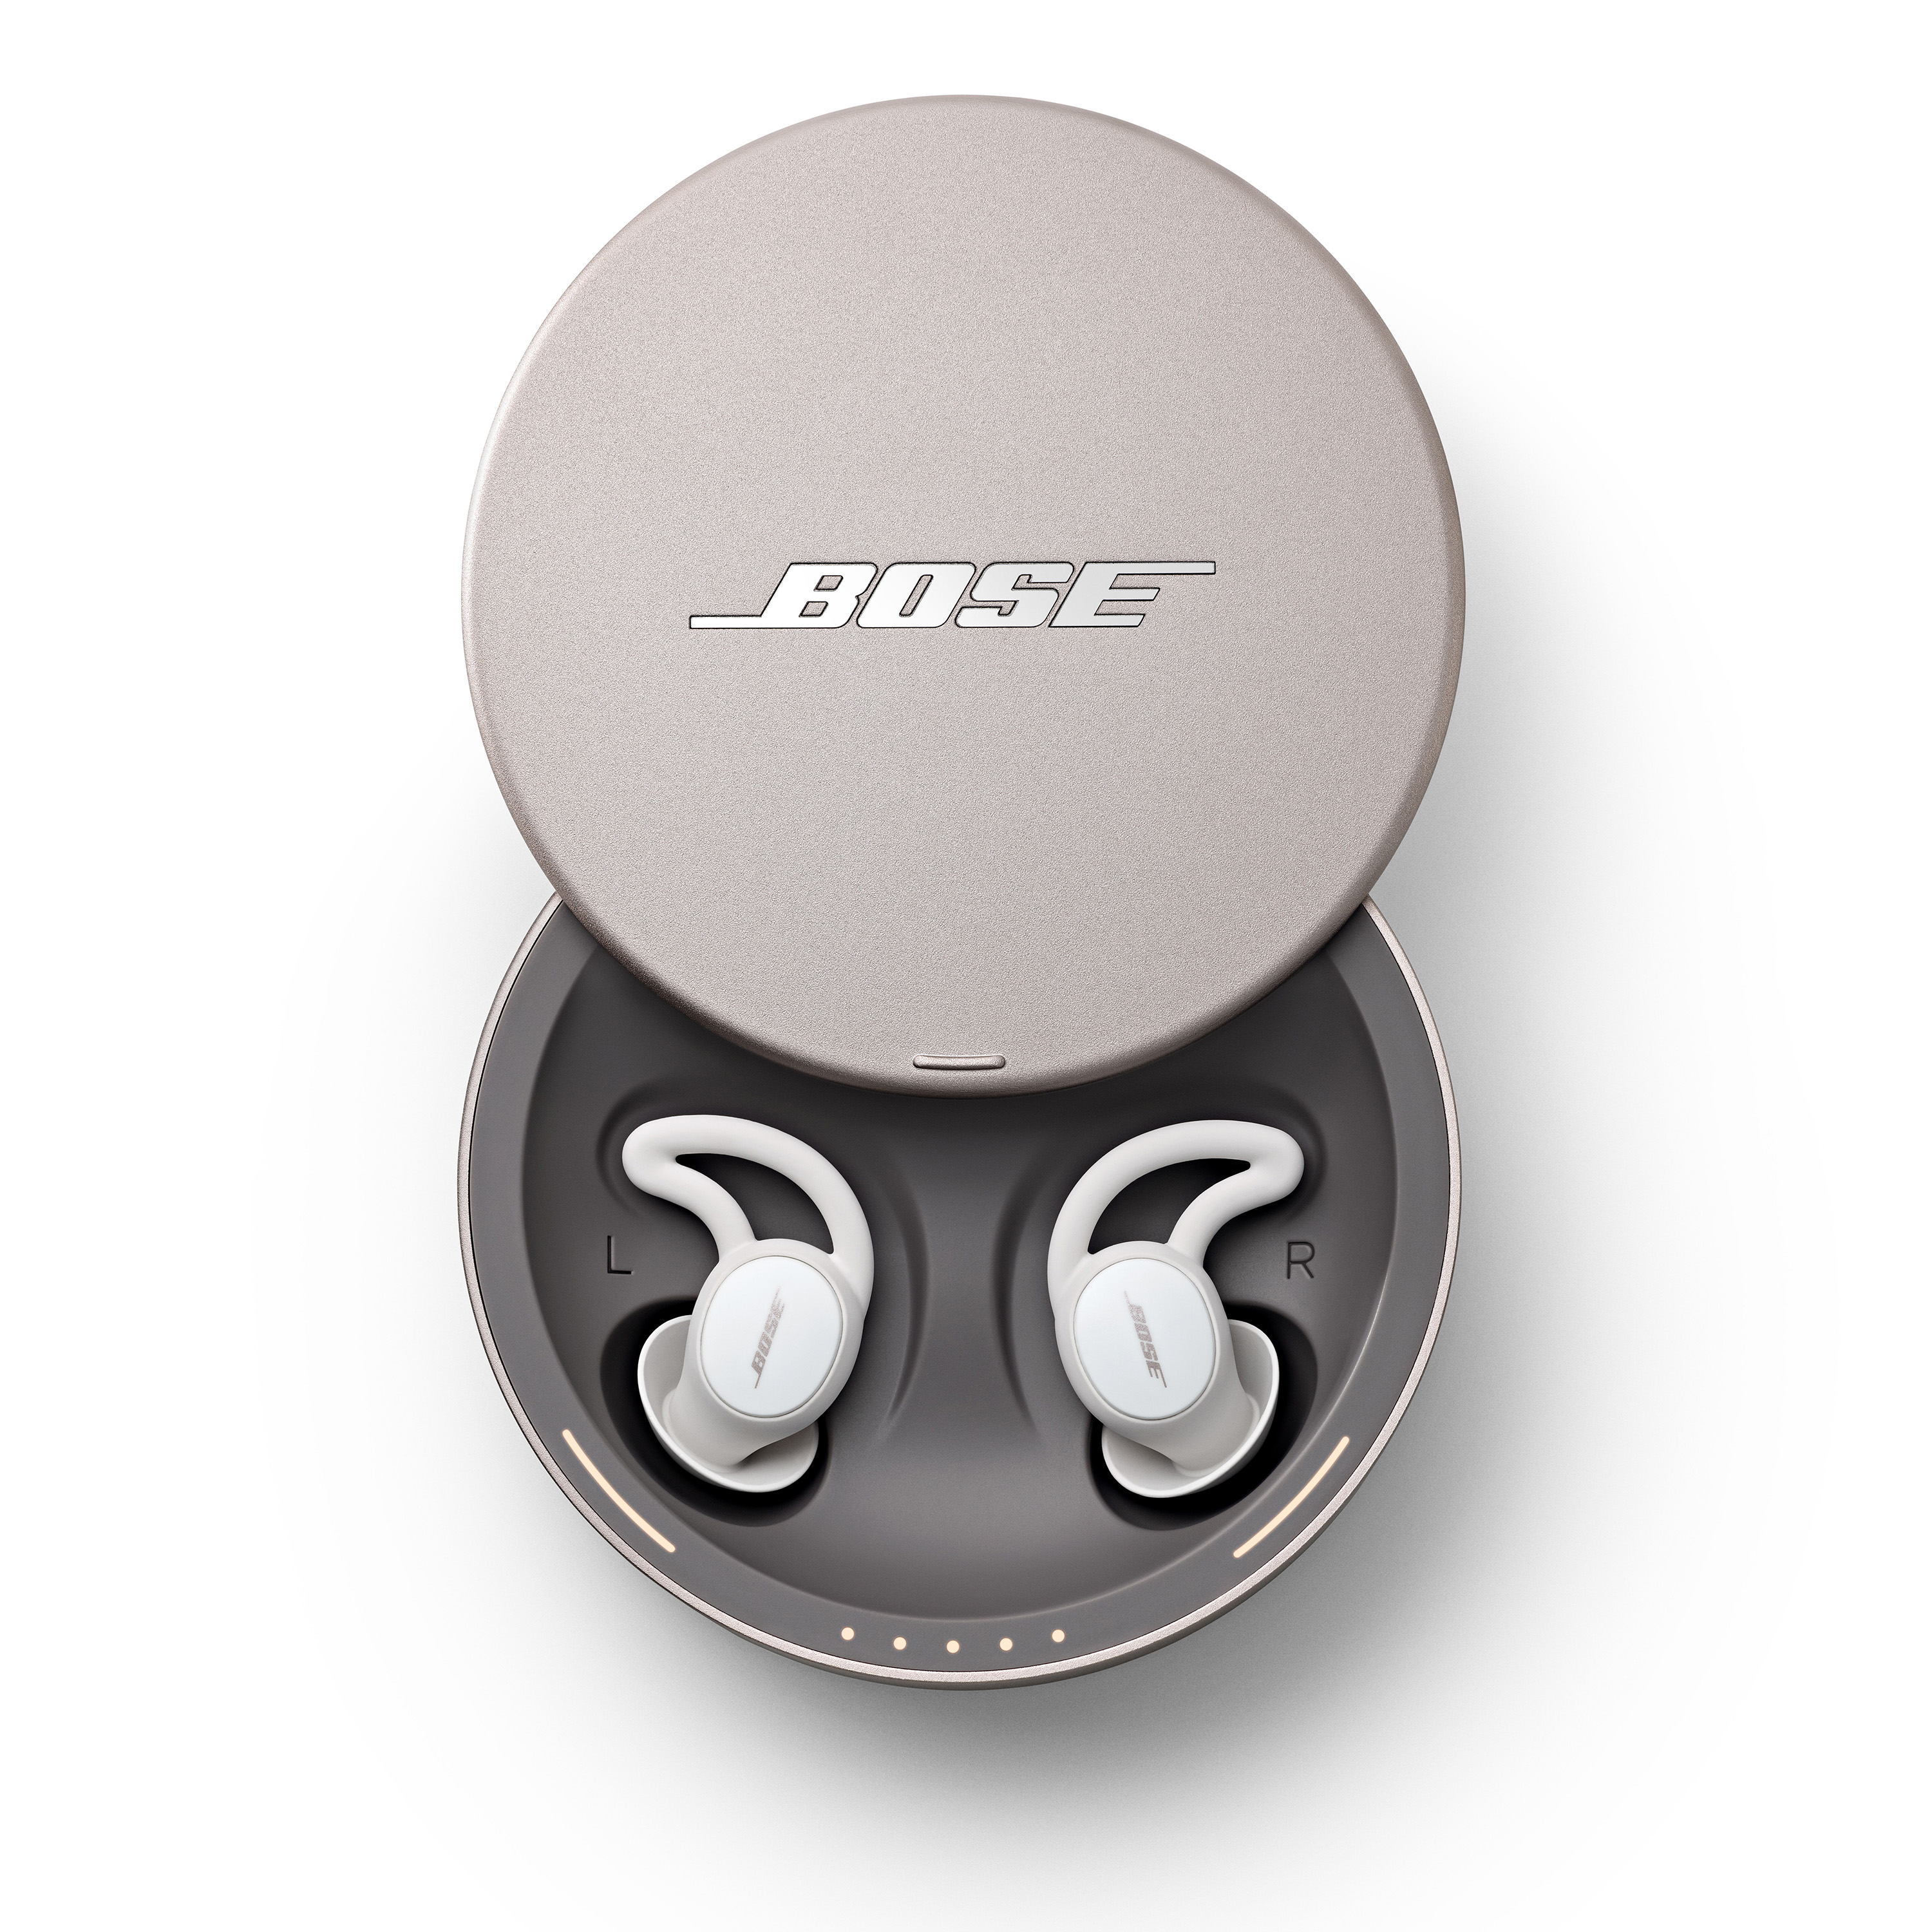 Bose’s latest sleep-centric earbuds mostly do the trick